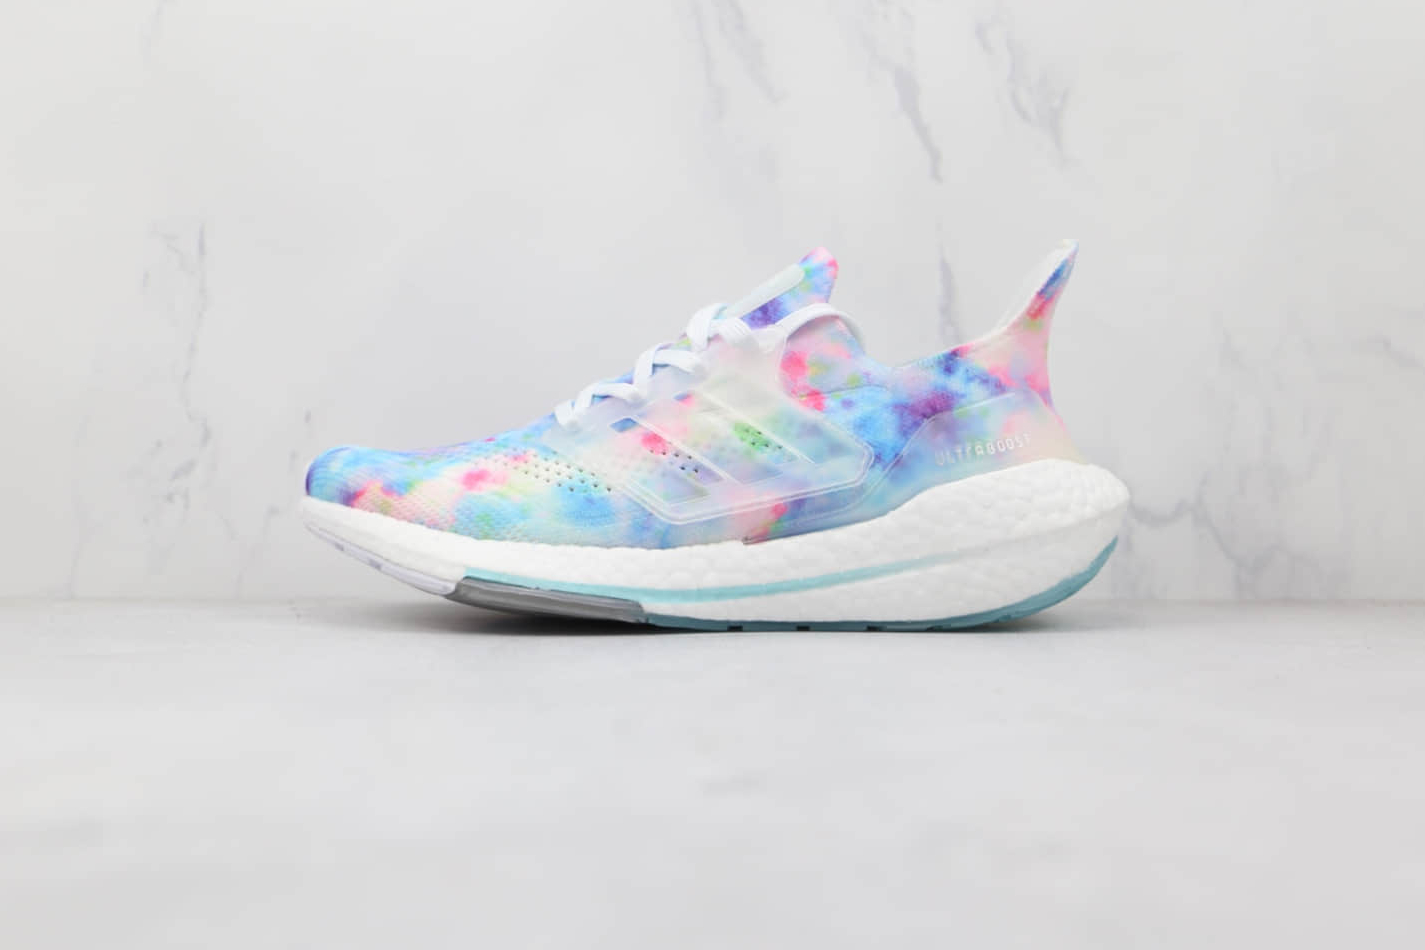 Adidas UltraBoost 21 Tie-Dye GZ7104 - Stylish and High-Performance Running Shoes